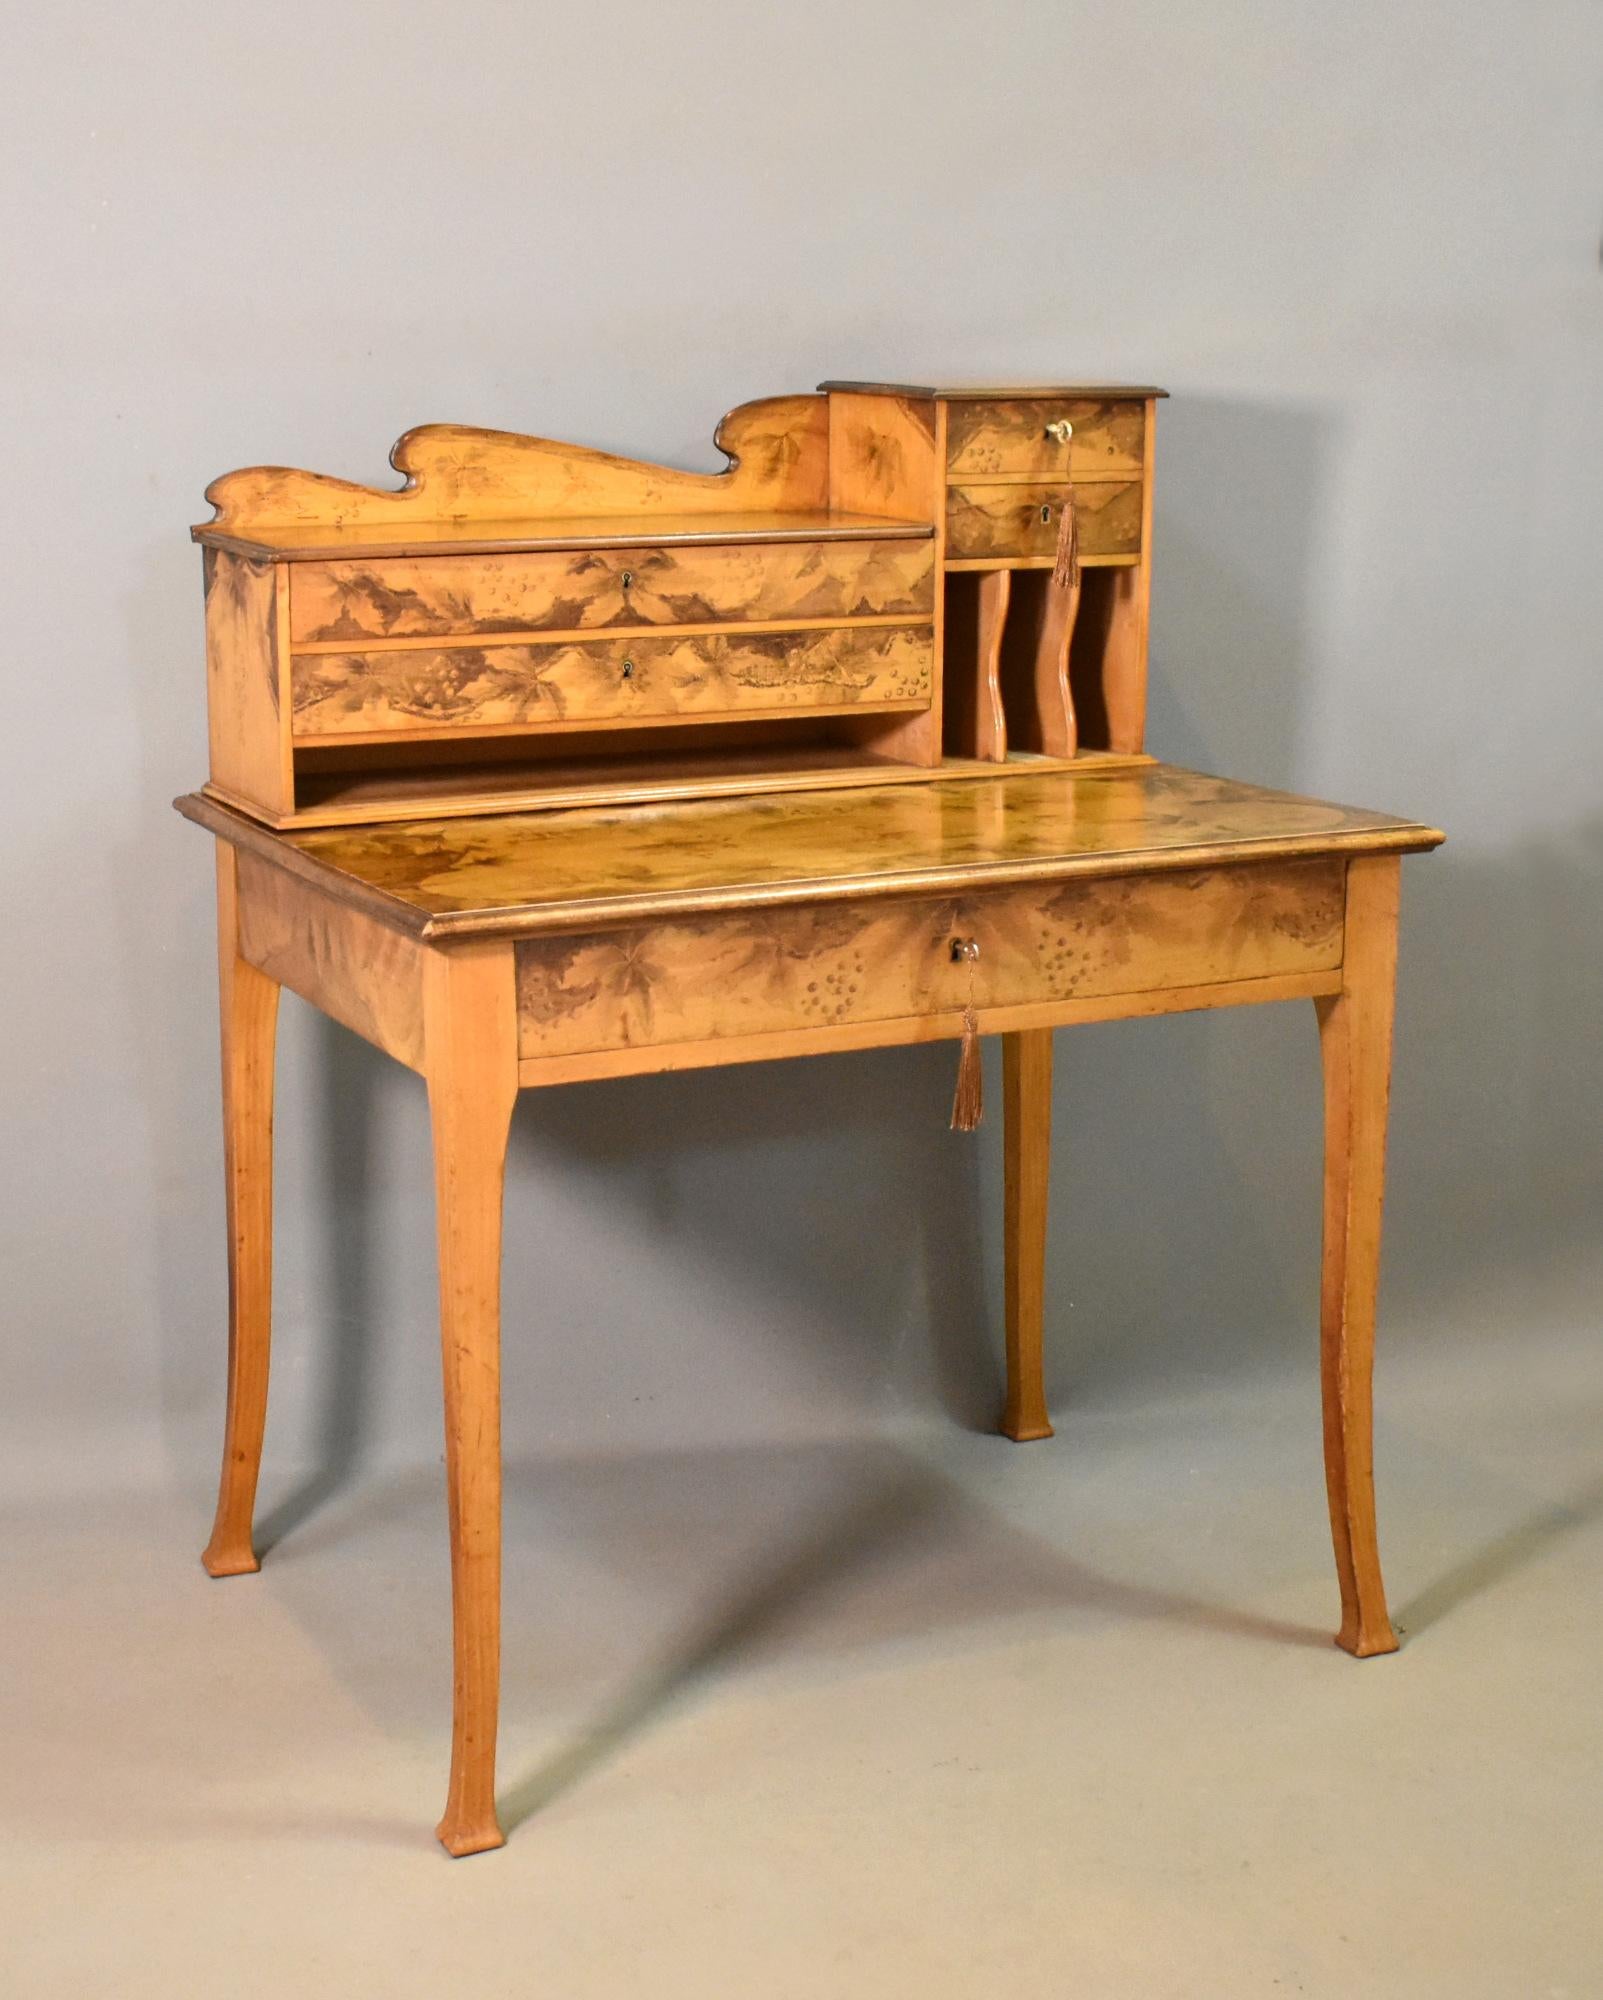 French Art Nouveau Tiered Pyrography Etched Desk